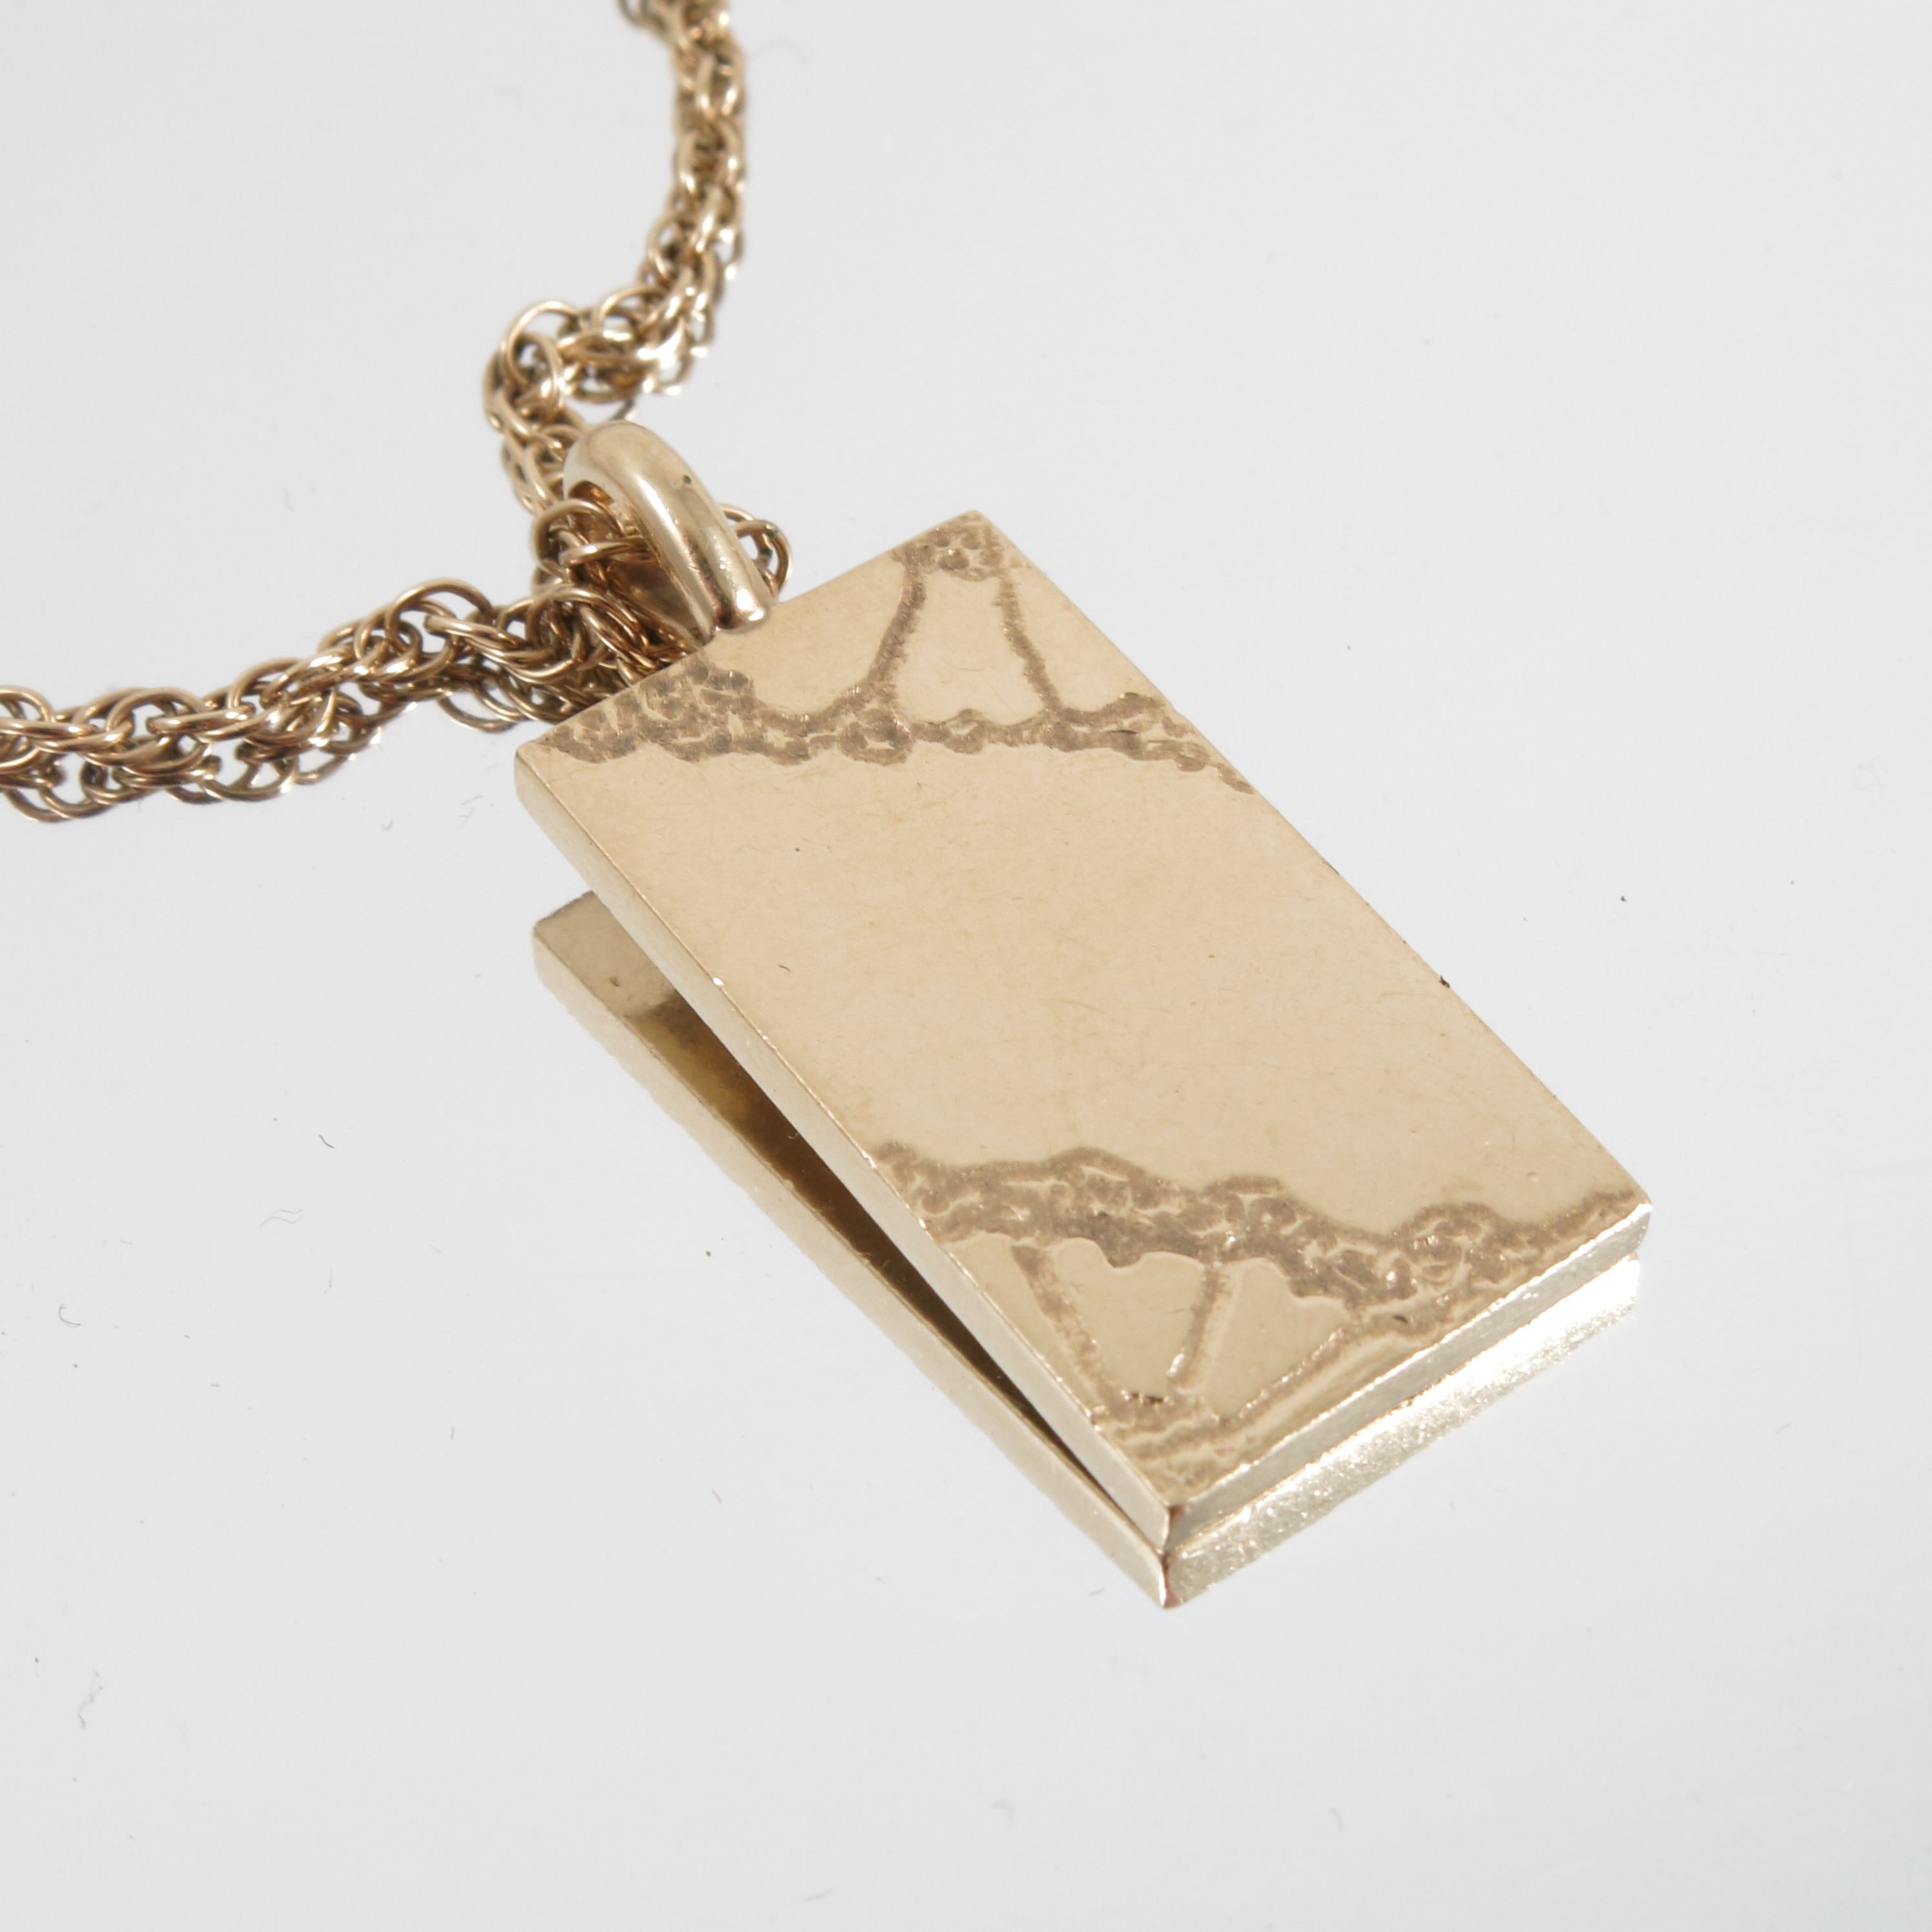 A 9 carat gold ingot, with engraved decoration, - Image 3 of 4